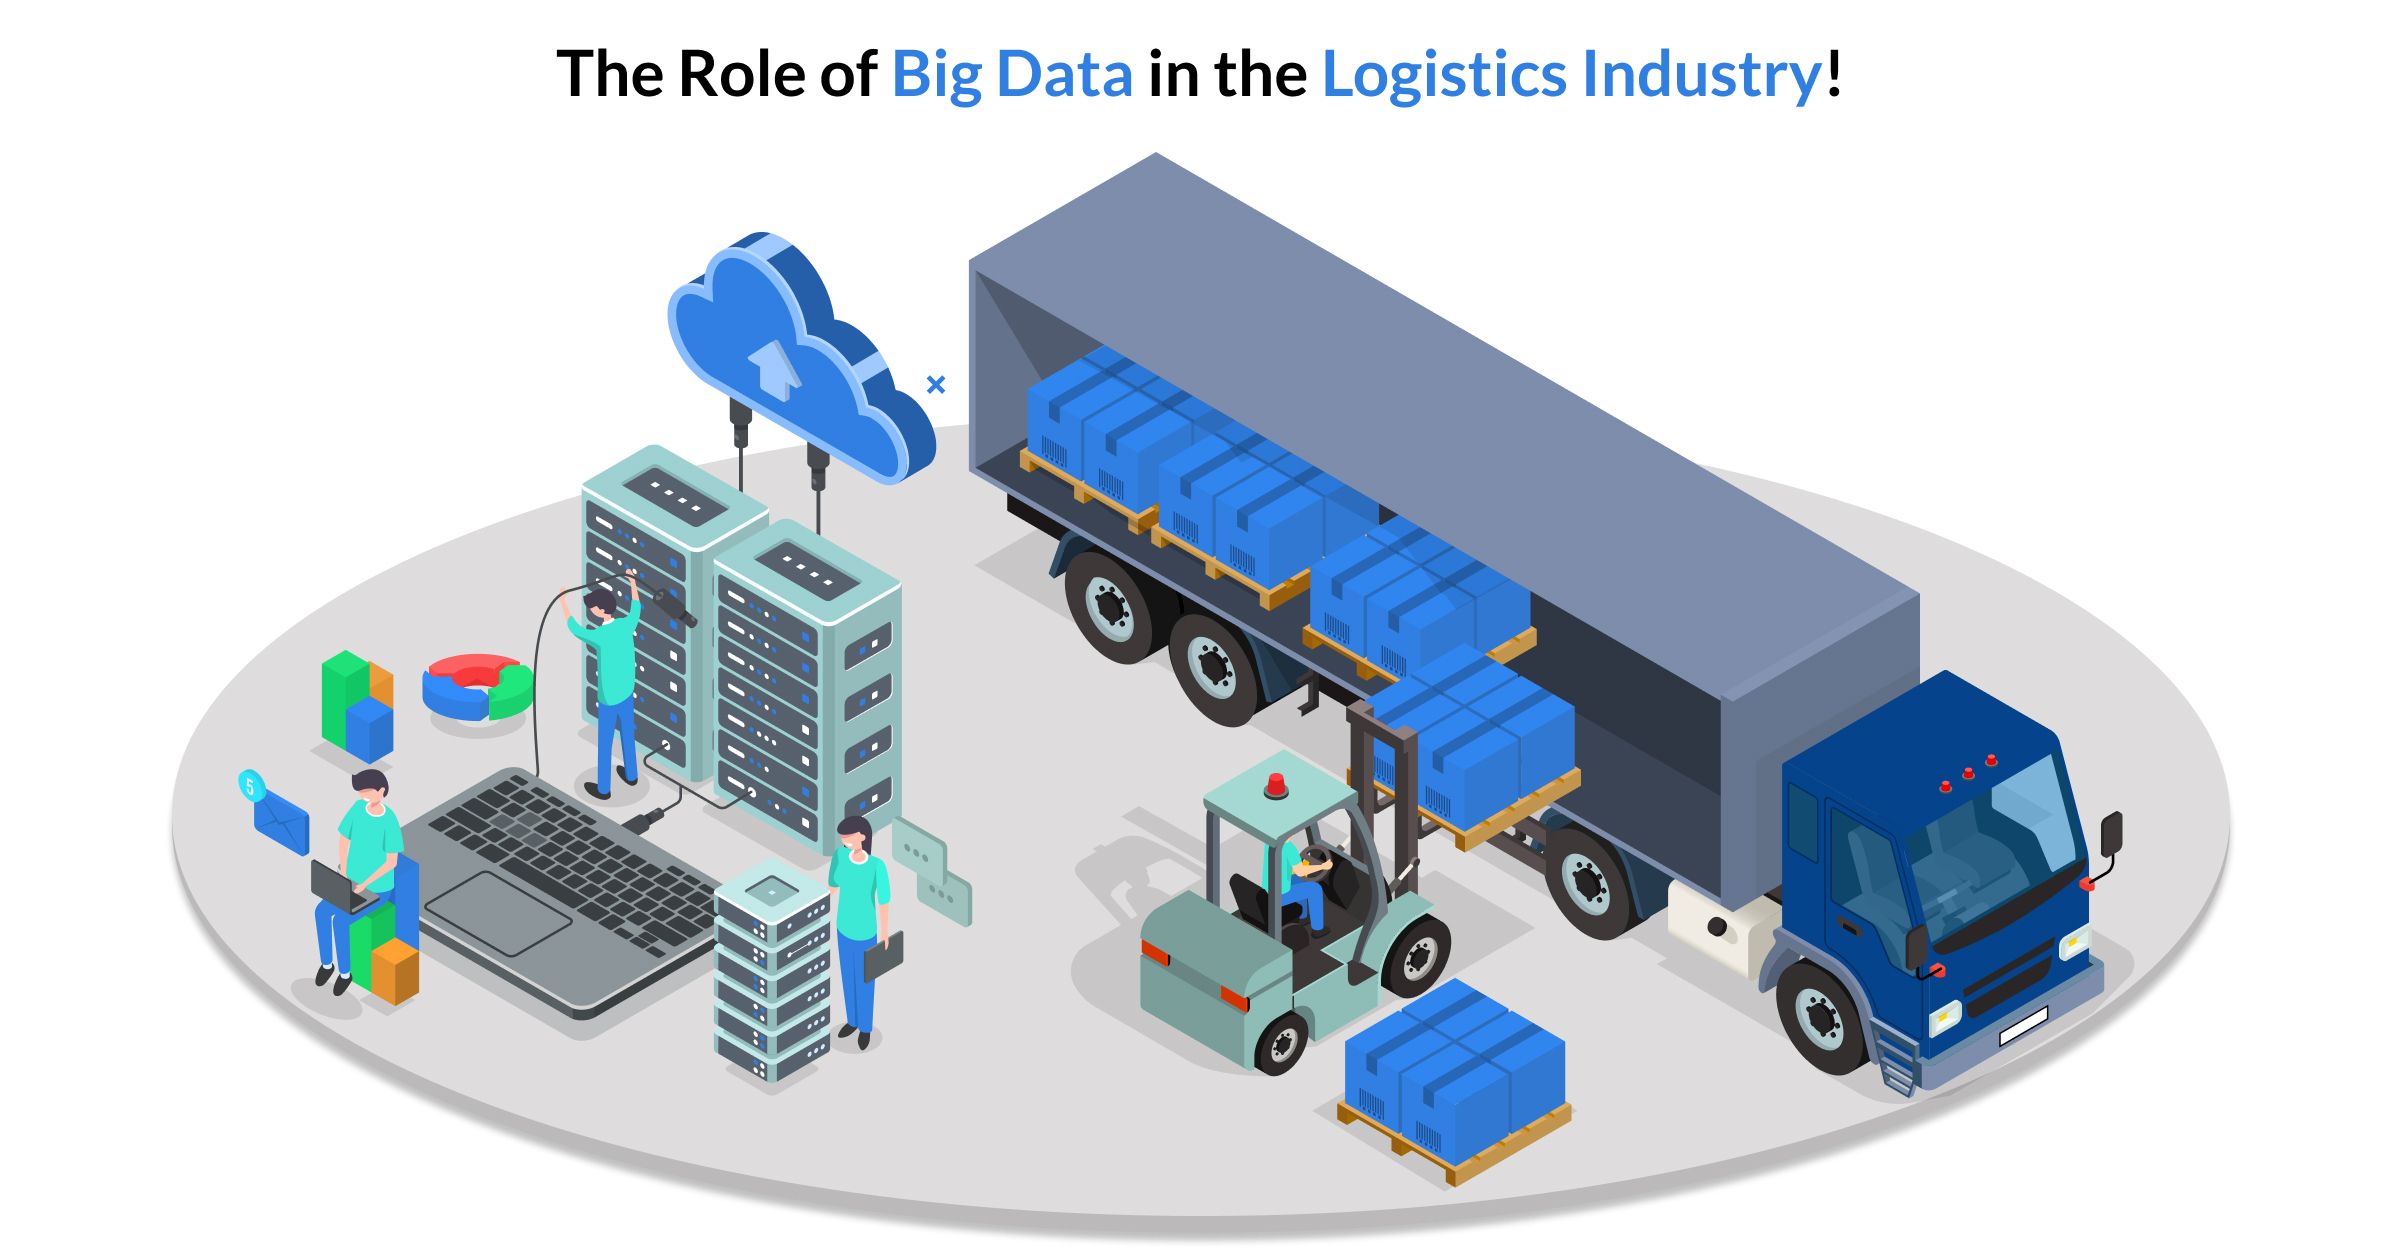 The Role of Big Data in the Logistics Industry!